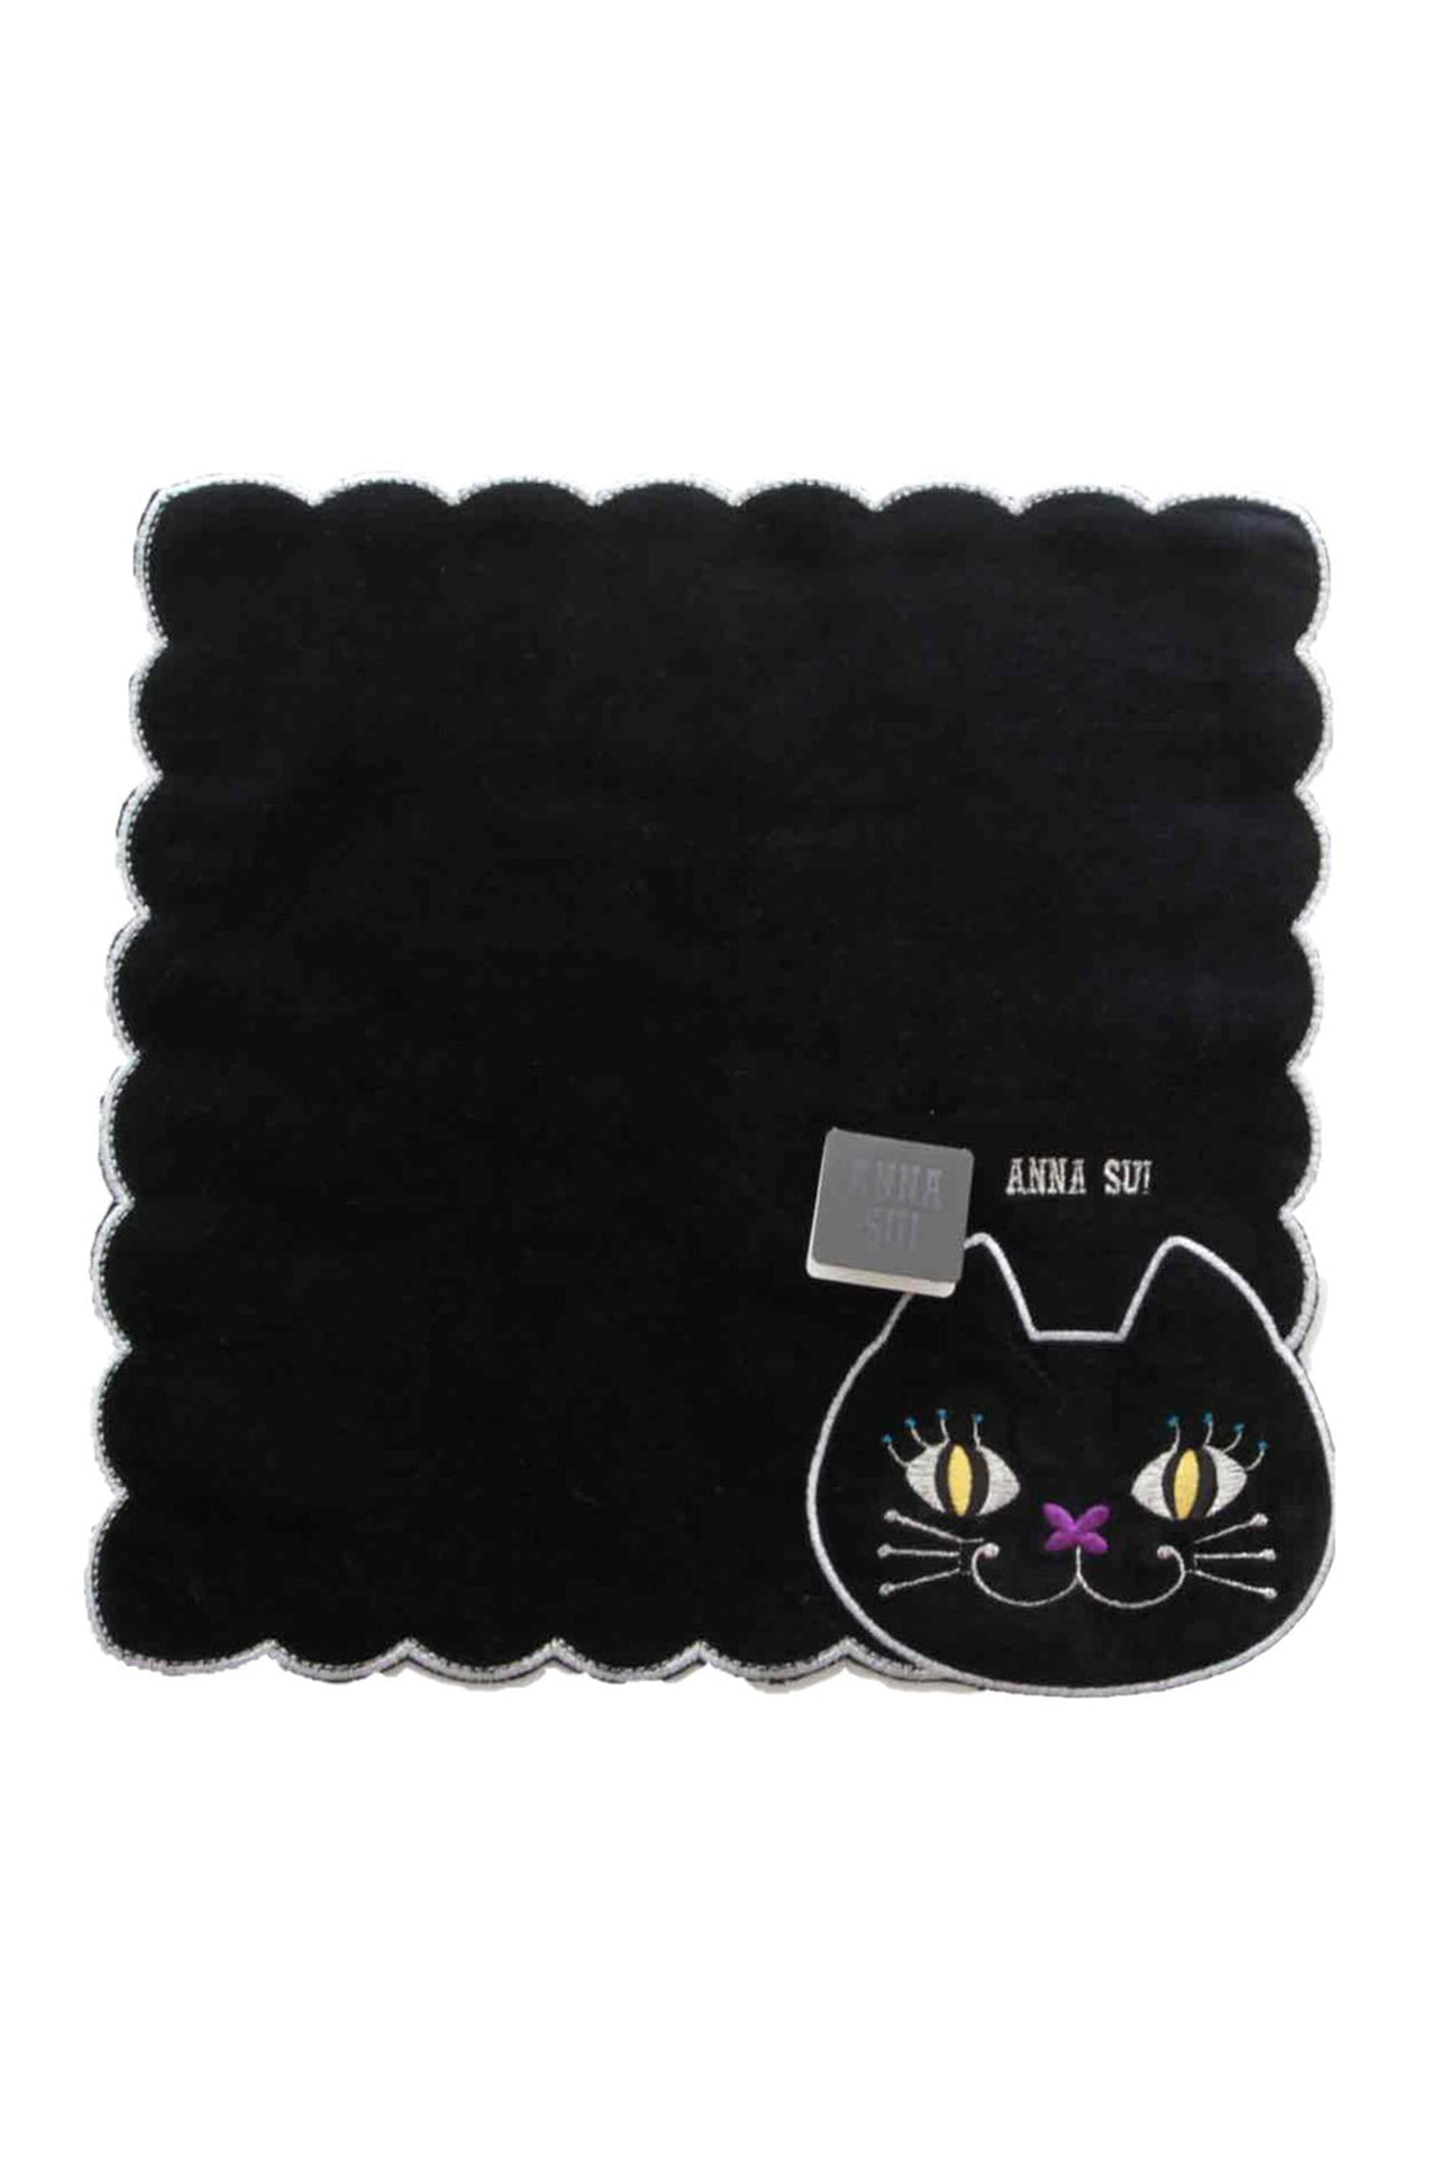 Black Washcloth squared, wavy hems, black cat with borders, yellow eyes, pink nose, Anna Sui label